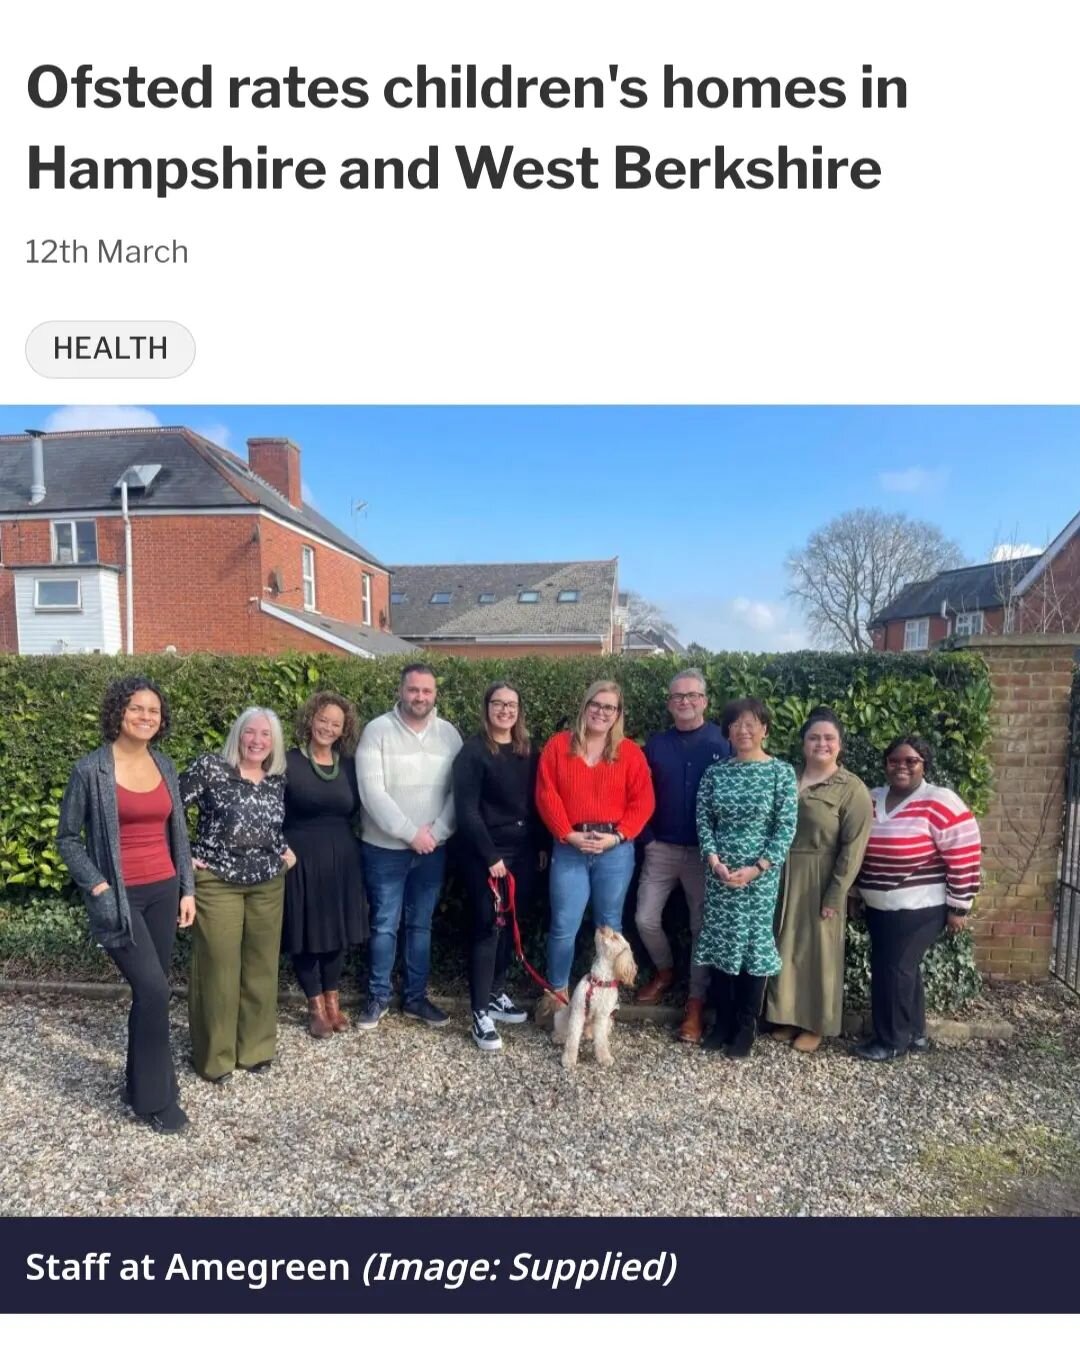 We are proud to be featured in the newest issue of Basingstoke Gazette. We are thankful for our Teams at the homes and the office team that work so hard to make this happen.💚💚💚

You can read the article here:

https://www.basingstokegazette.co.uk/